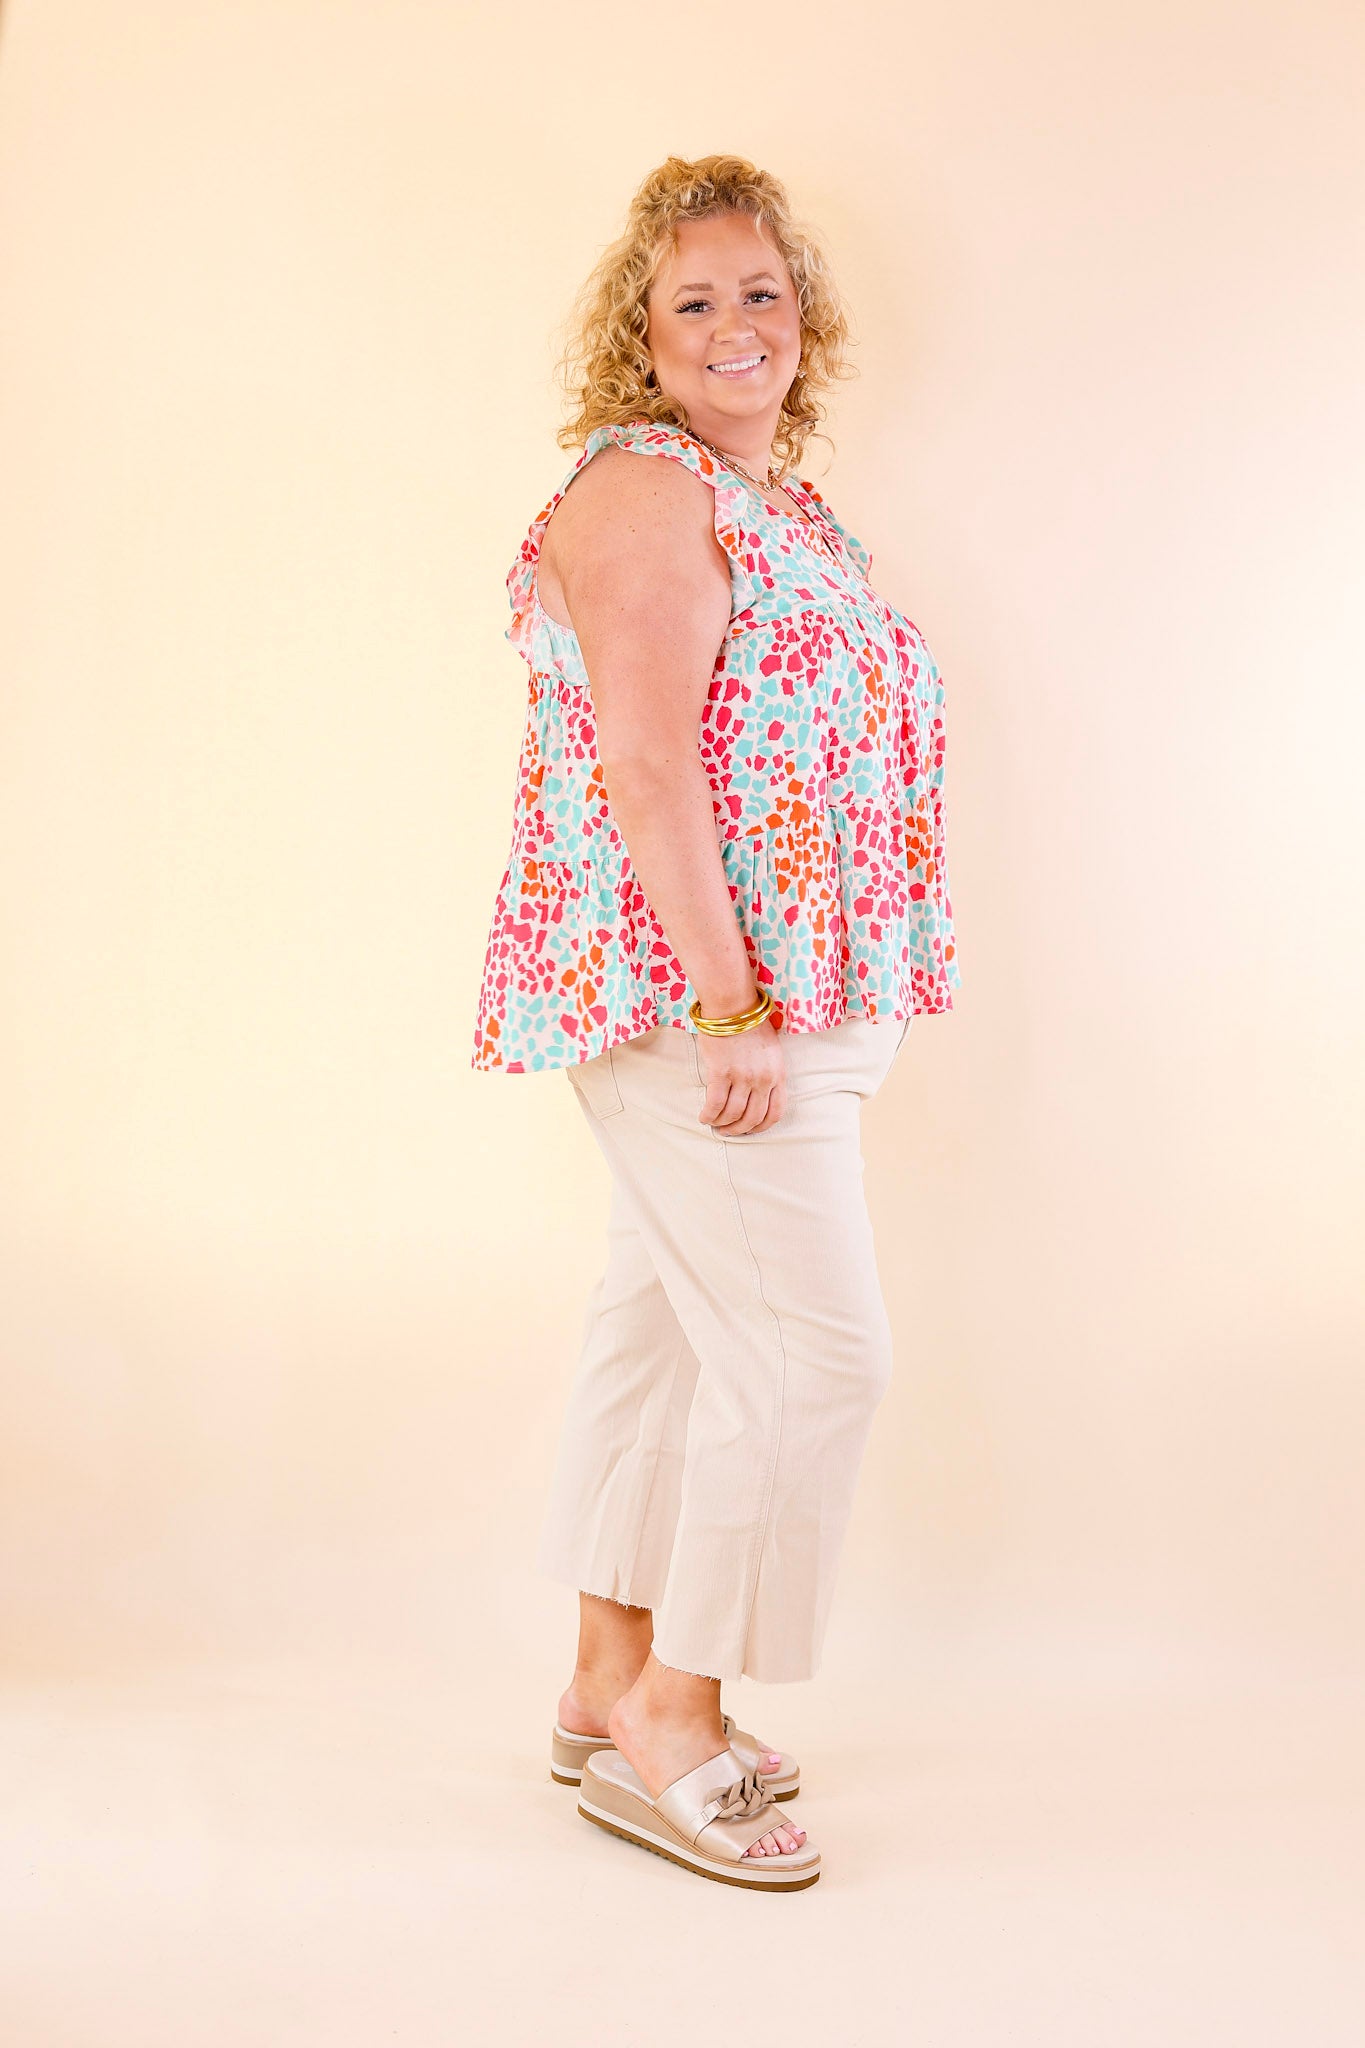 Inspiring Sights Dotted V Neck Top with Ruffle Cap Sleeves in White - Giddy Up Glamour Boutique